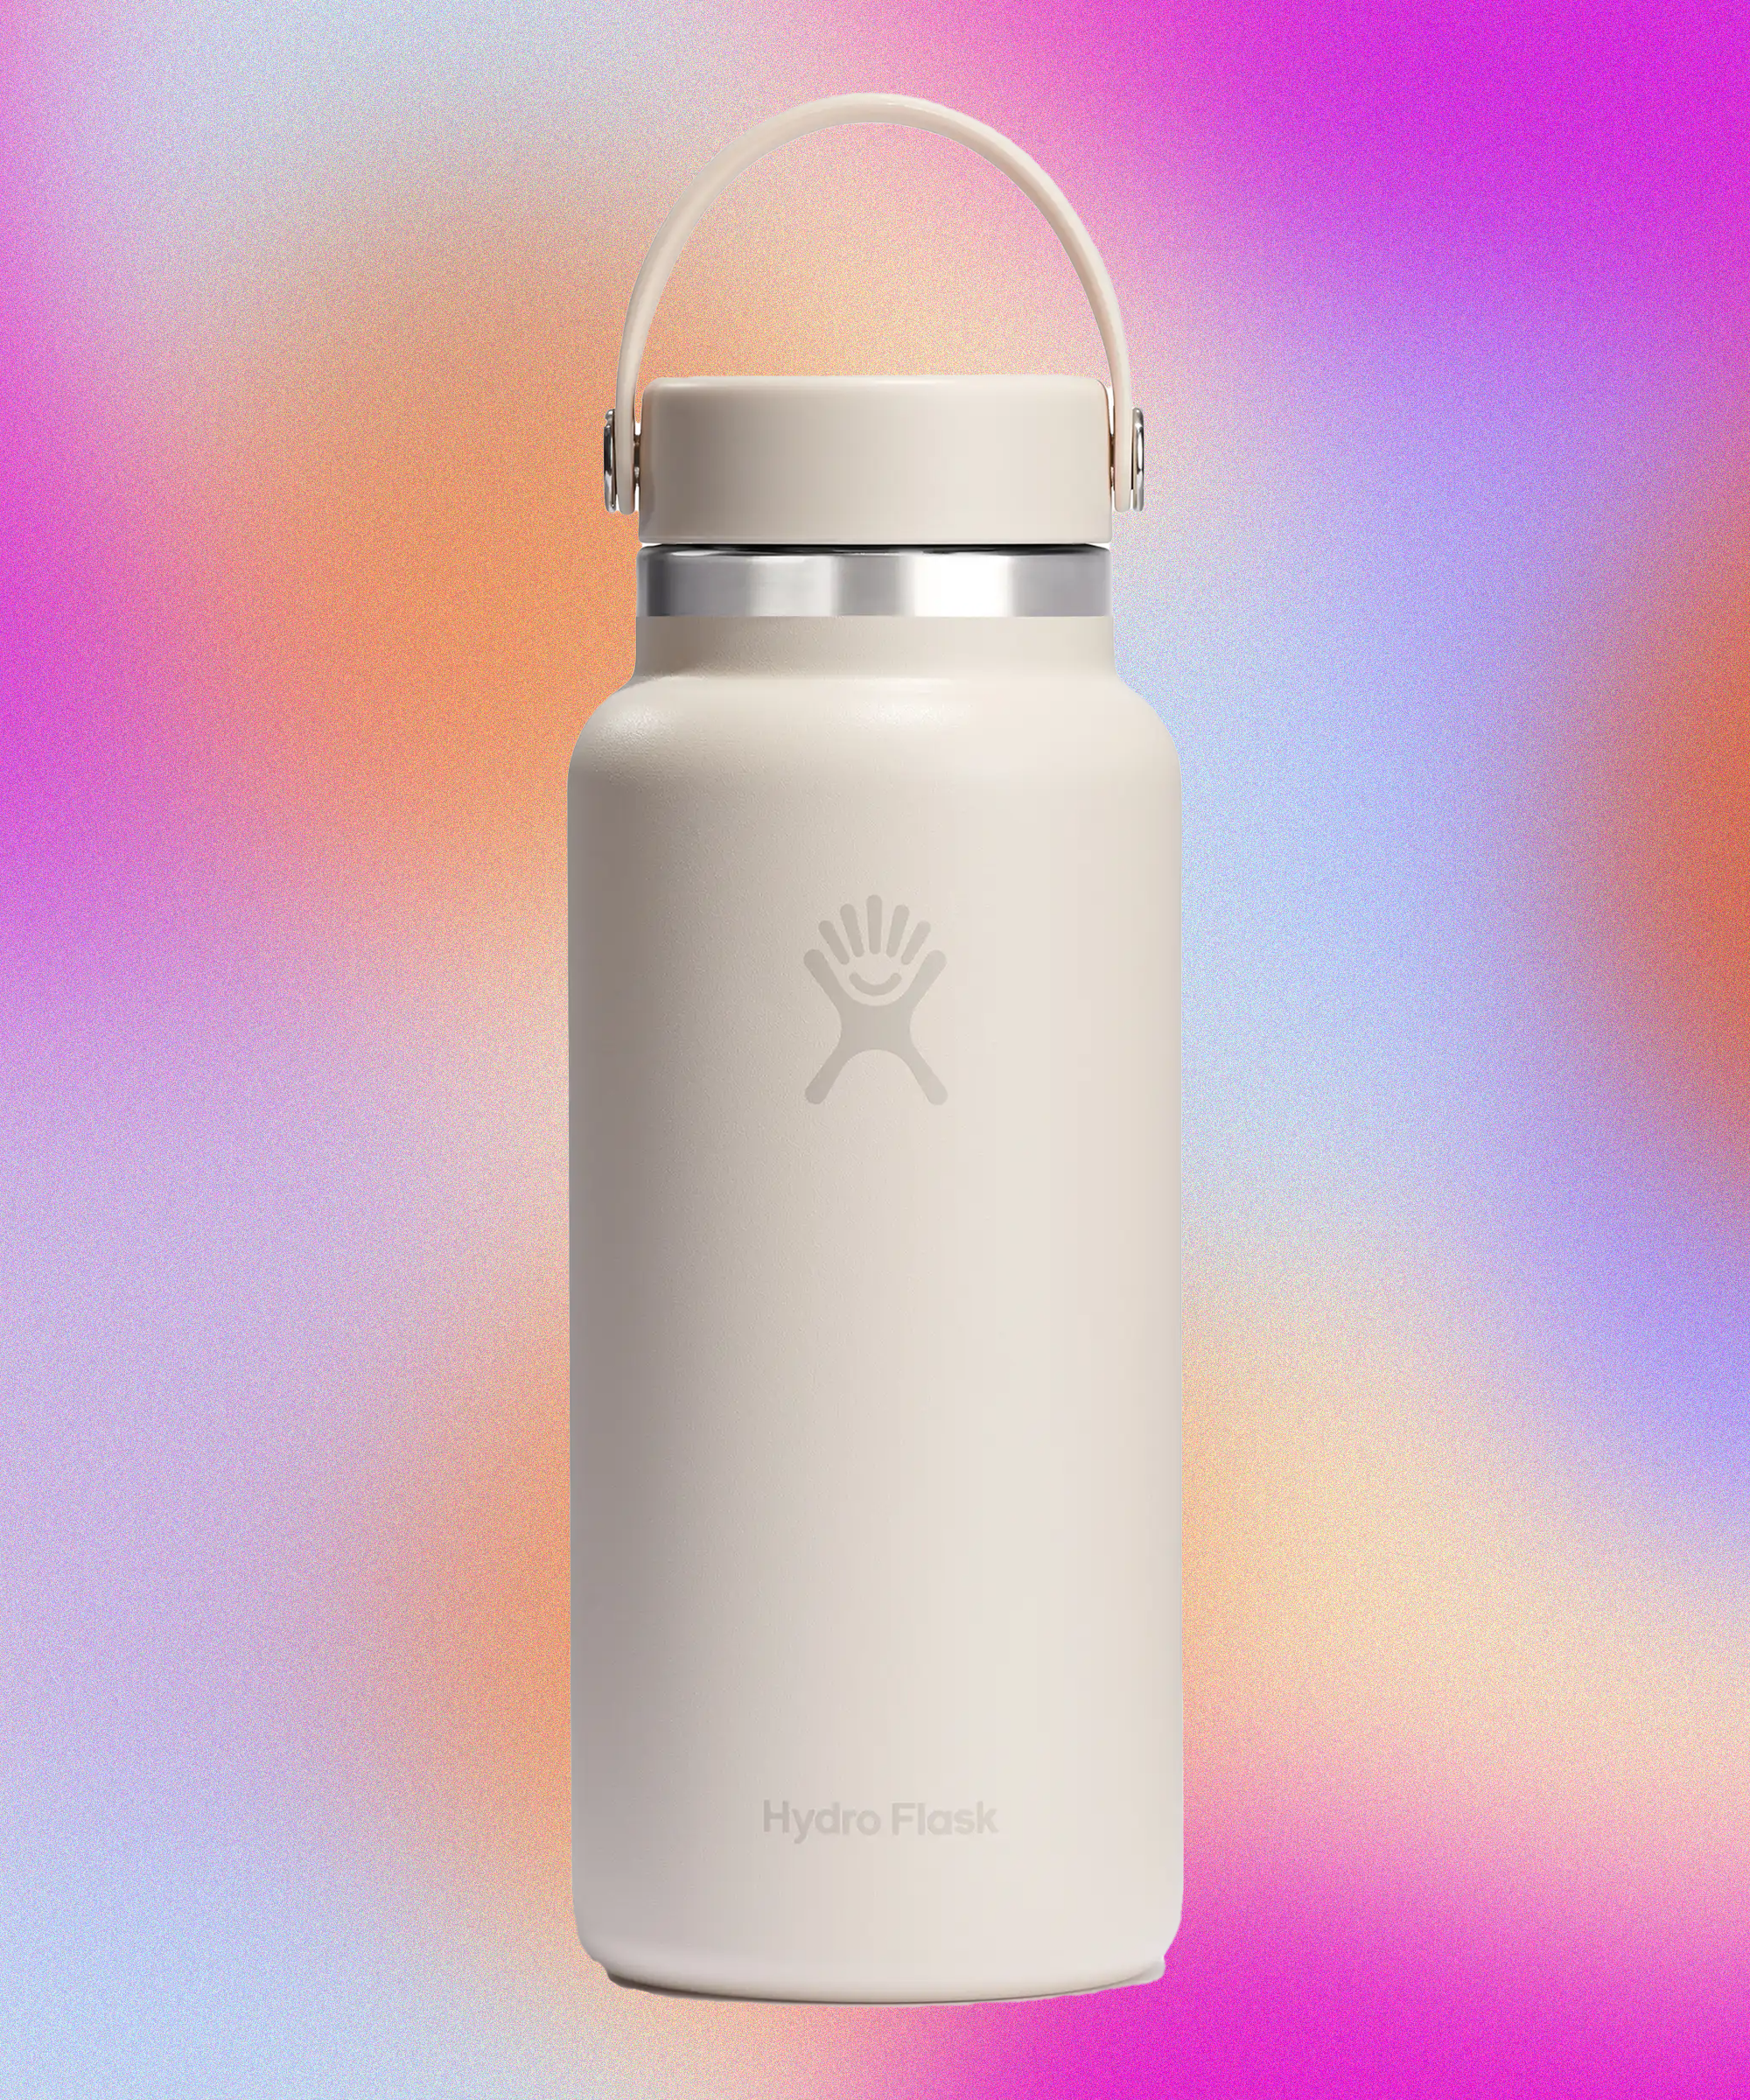 Nordstrom 2023 Anniversary Sale - Exclusive Colors: Ultraviolet & Moonlight  : r/Hydroflask